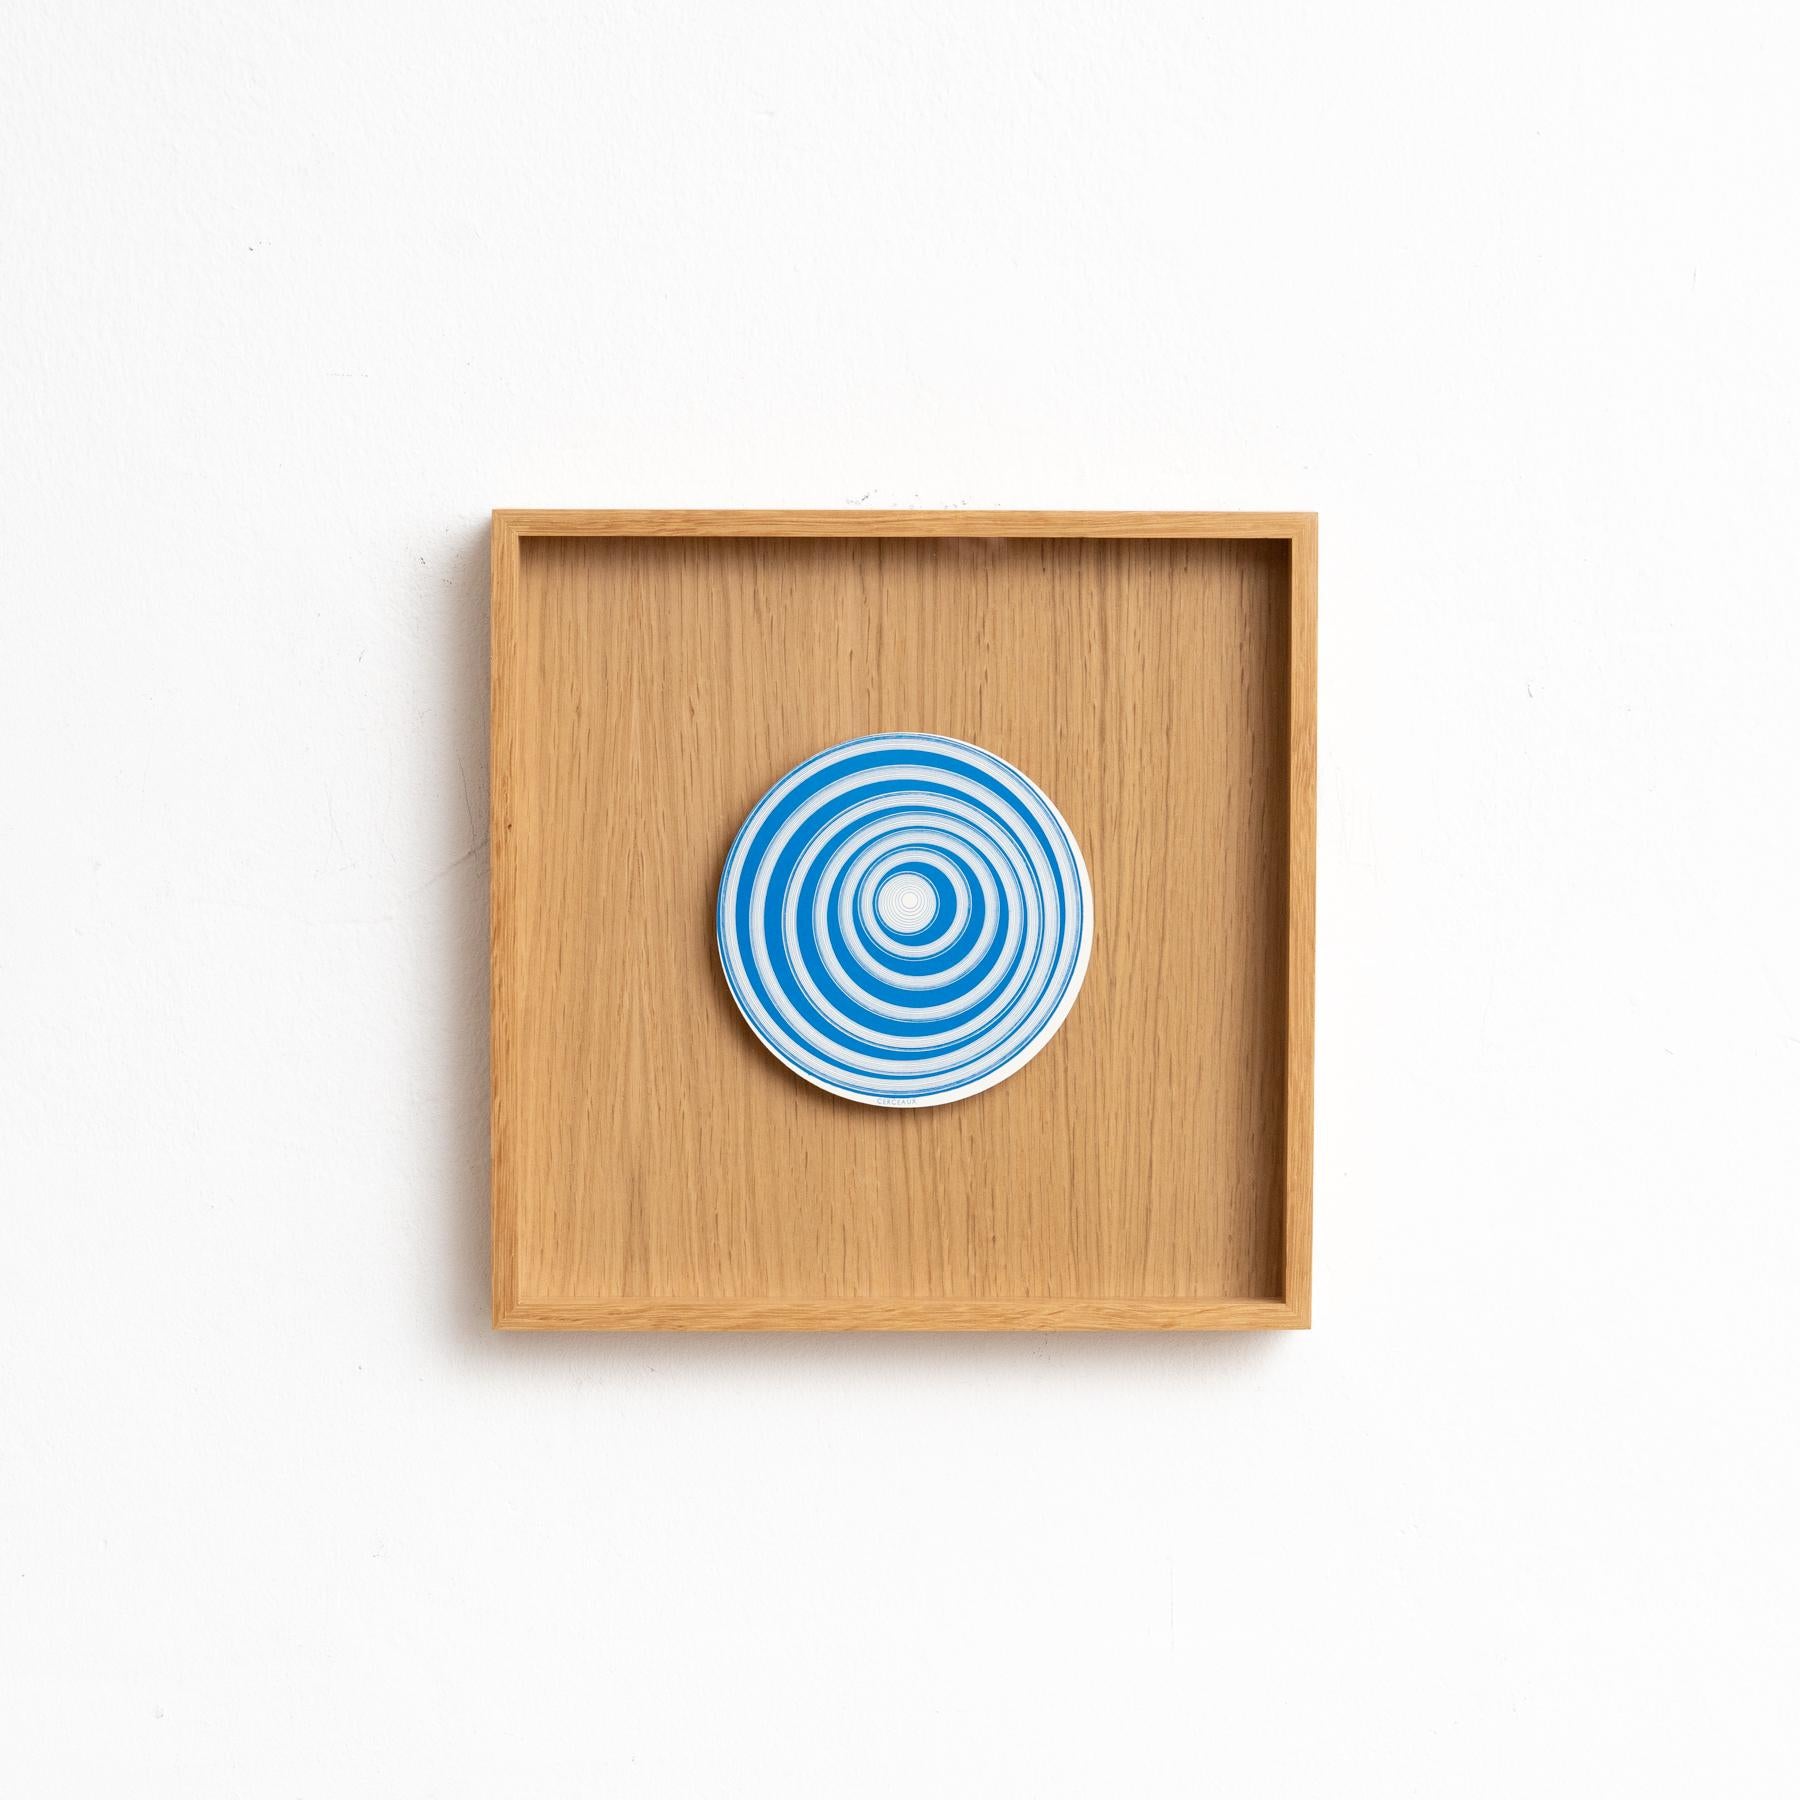 Marcel Duchamp Framed Rotorelief.

Model Cerceaux in Blue and White

Edited by Walther König Series 133, Germany in 1987.

Framed Artwork in Wood.

In original condition, with minor wear consistent of age and use, preserving a beautiful